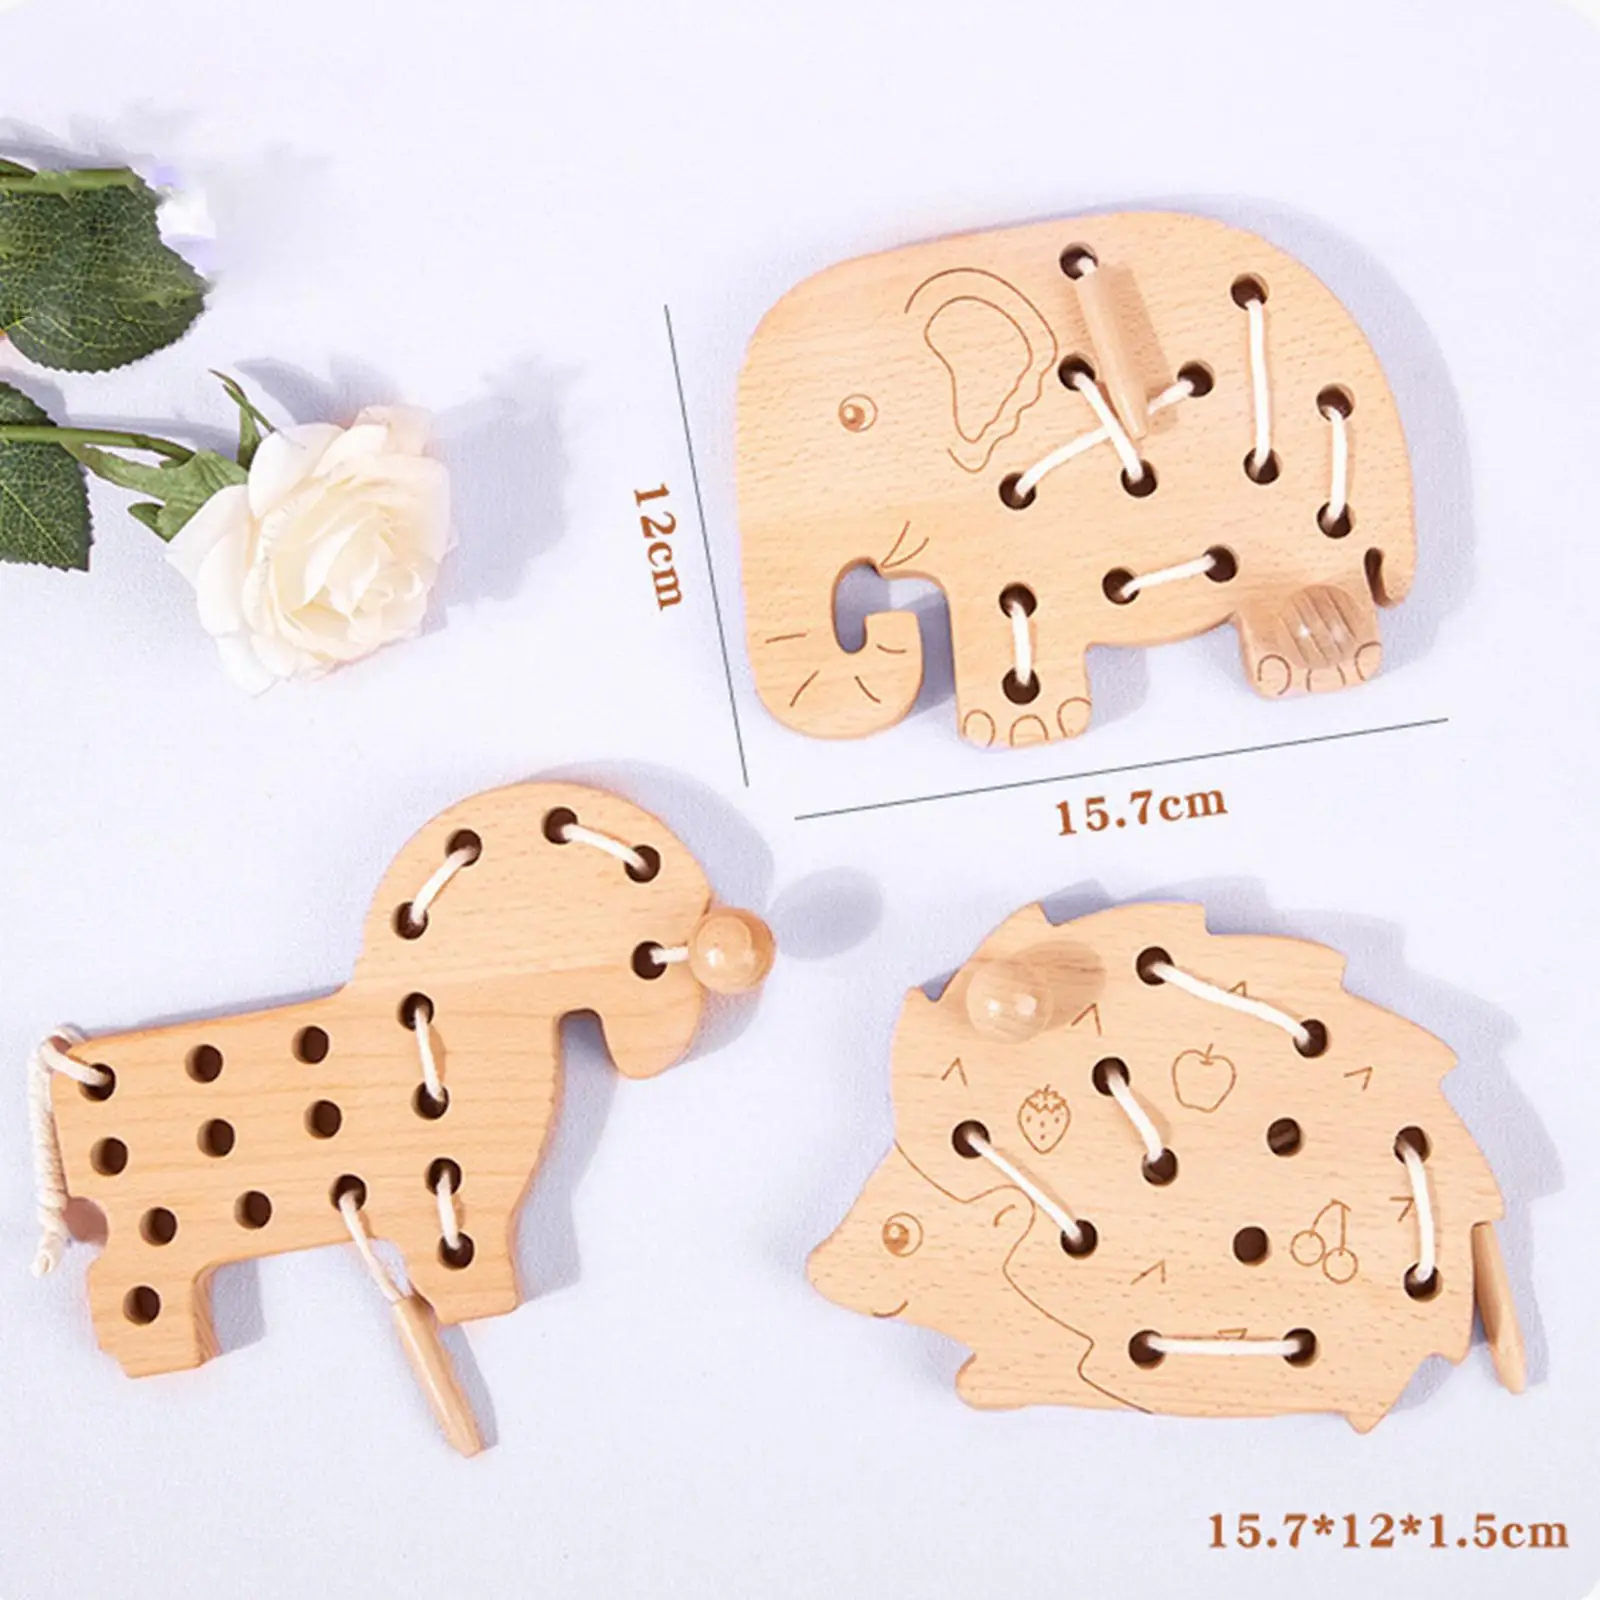 3x Wood Lace Block Puzzle Teaching Aids Educational Wooden Lacing Threading for Kids Car Boys Birthday Gift